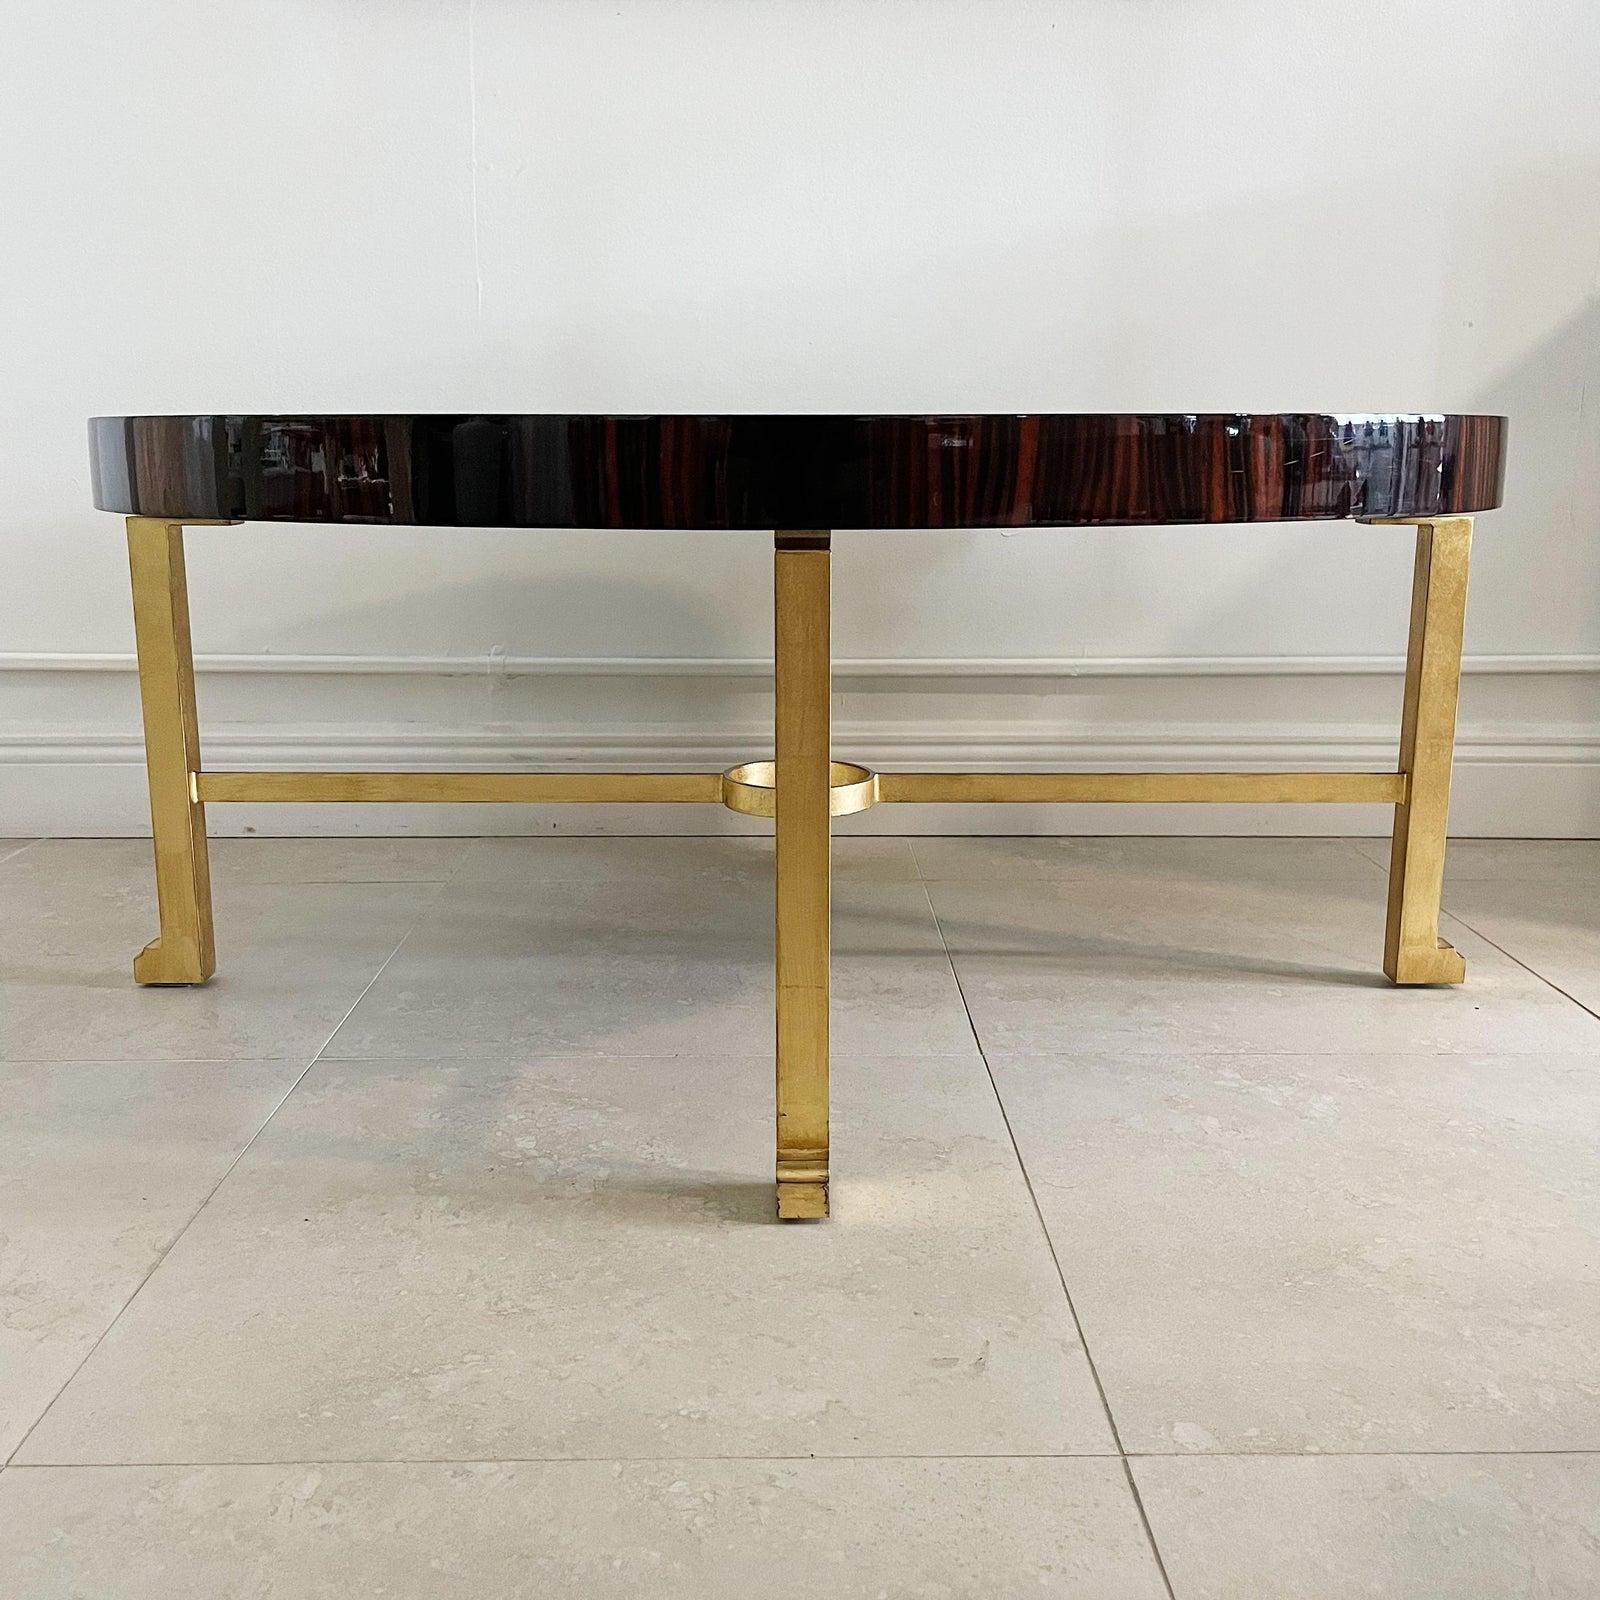 Macassar ebony veneer, gilt iron and parchment coffee table in the style of Karl Springer circa 1995. signed on underside.